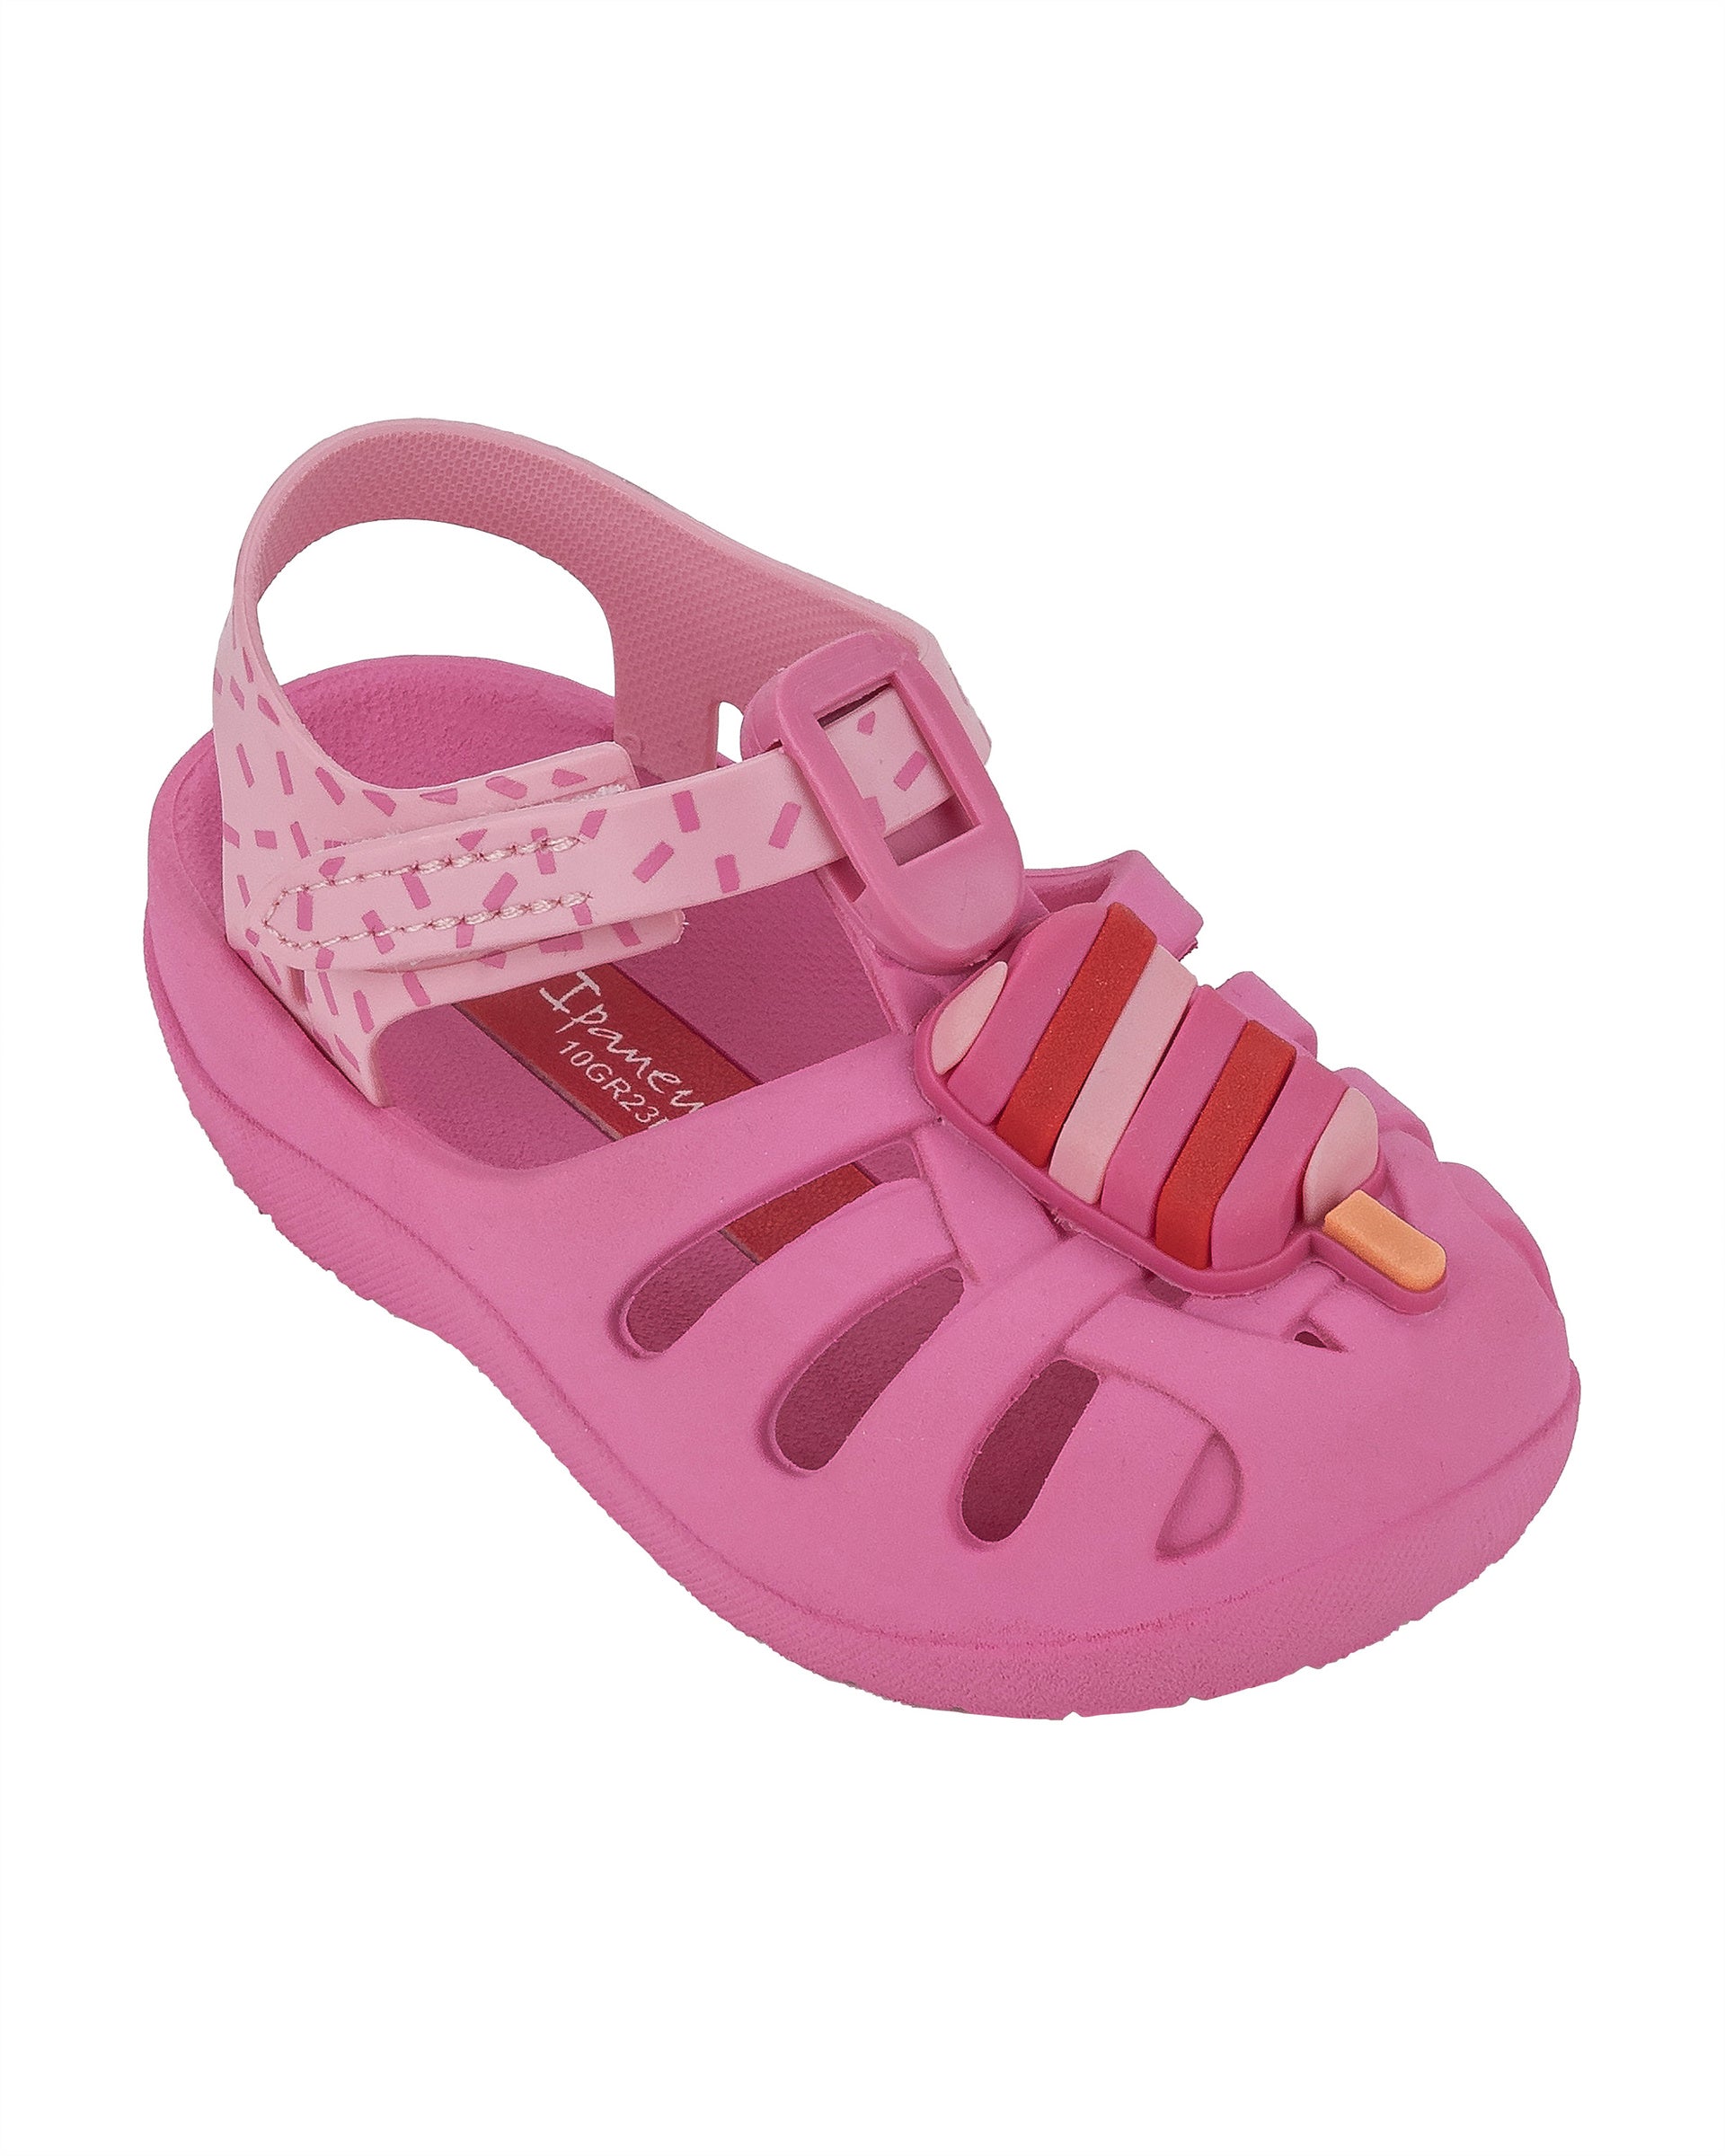 Angled view of a pink Ipanema Summer baby fisherman sandal with a popsicle on the upper.